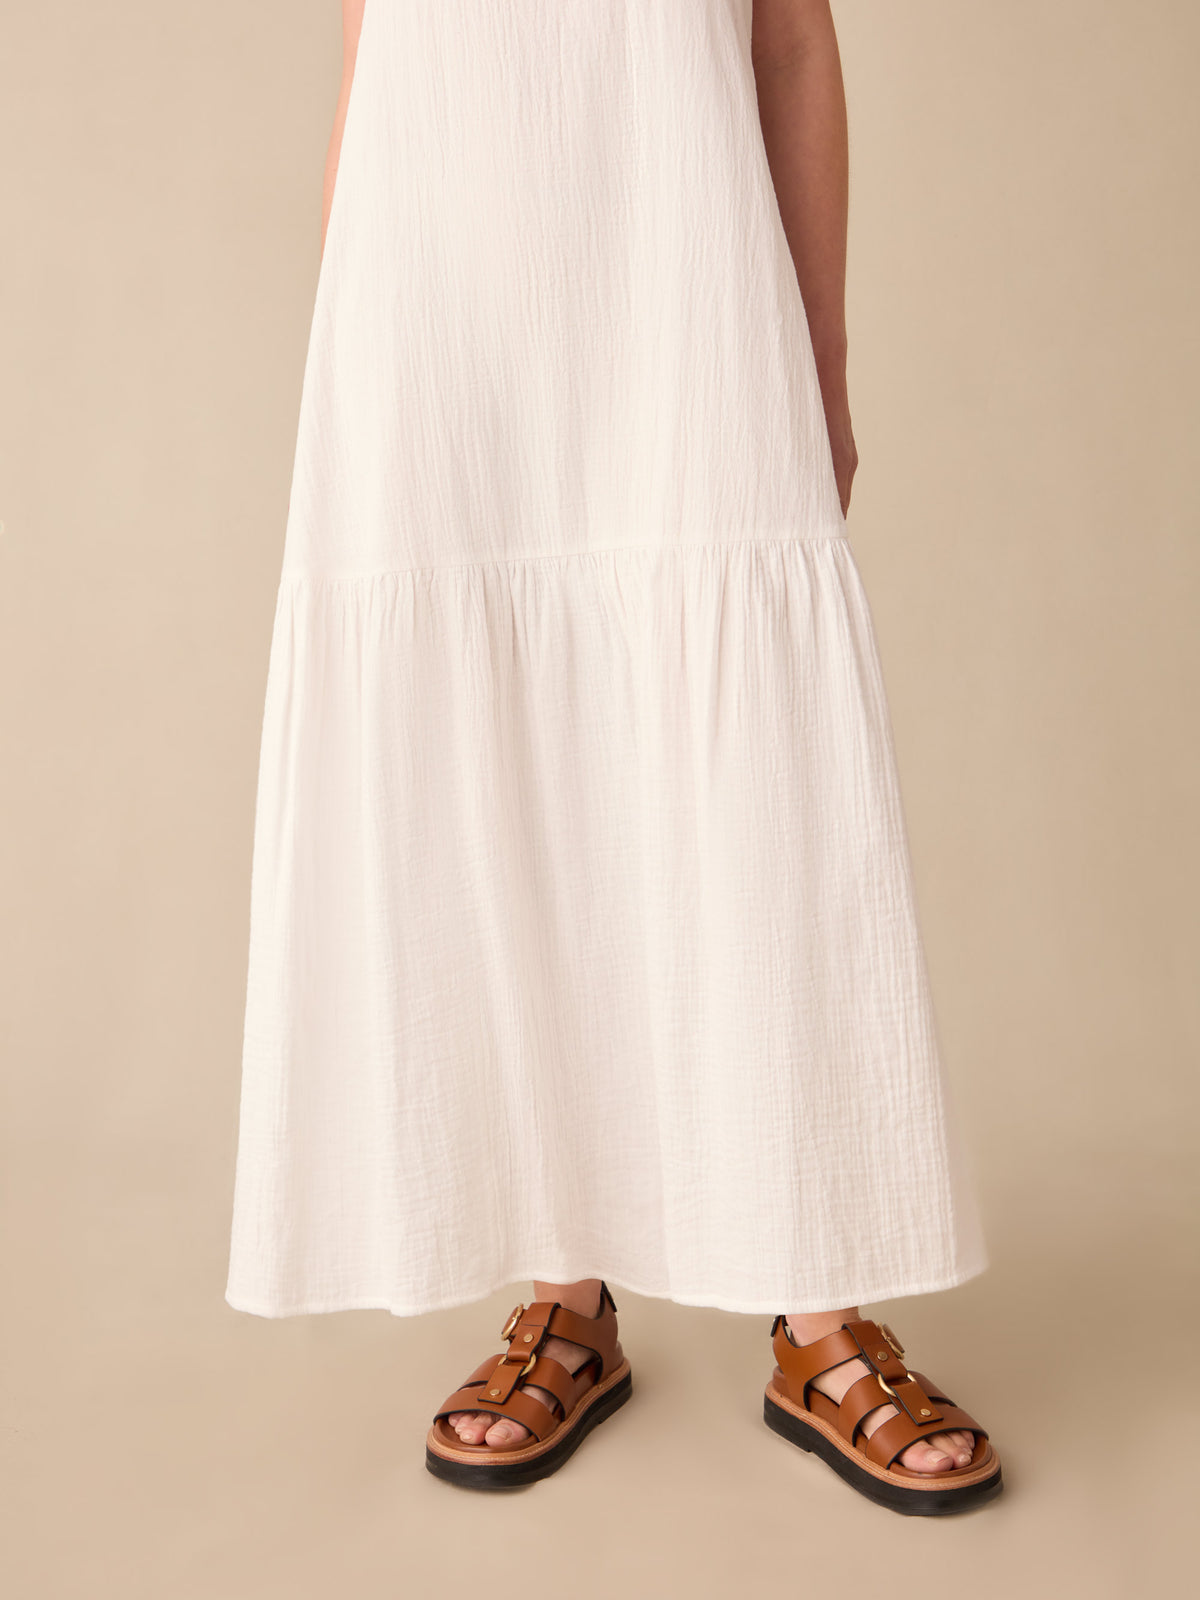 Petite White Tiered Hem Strappy Cheesecloth Dress